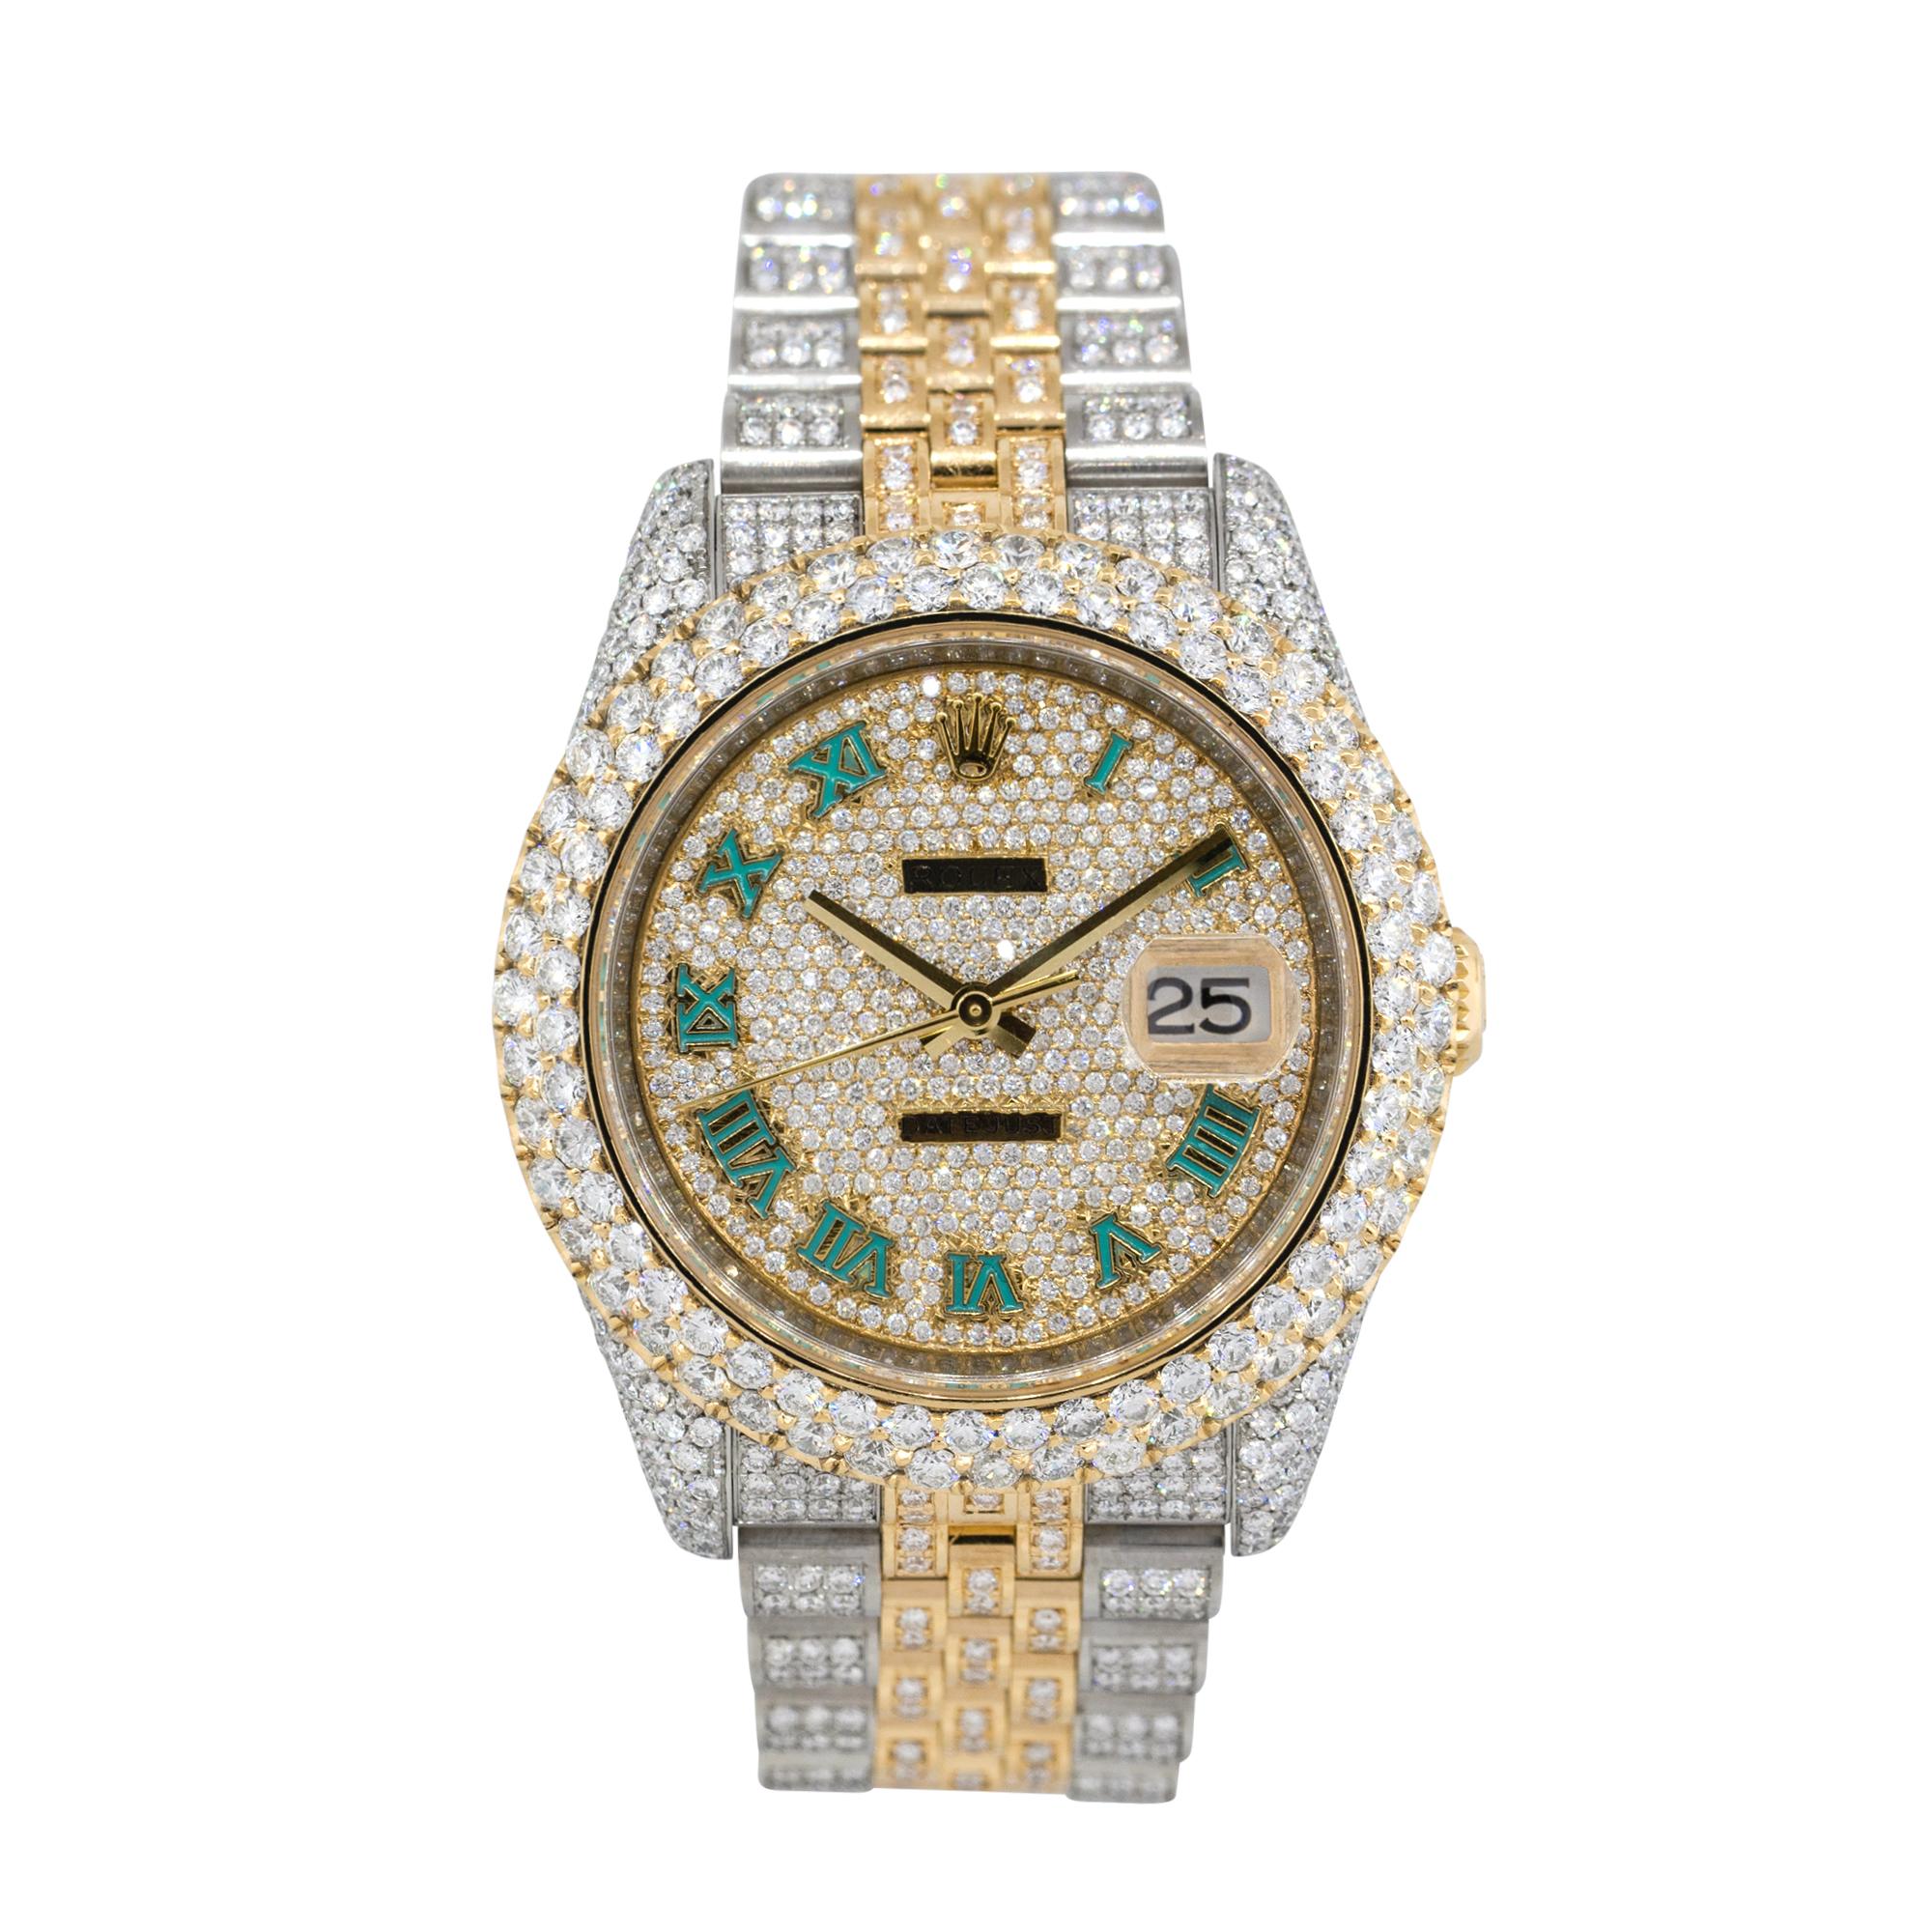 Brand: Rolex
MPN: 116233 
Model: Datejust
Case Material: Stainless steel with aftermarket Diamonds
Case Diameter: 36mm
Crystal: Sapphire Crystal
Bezel: Yellow gold bezel with double row of aftermarket Diamonds
Dial: Aftermarket Diamond pave dial